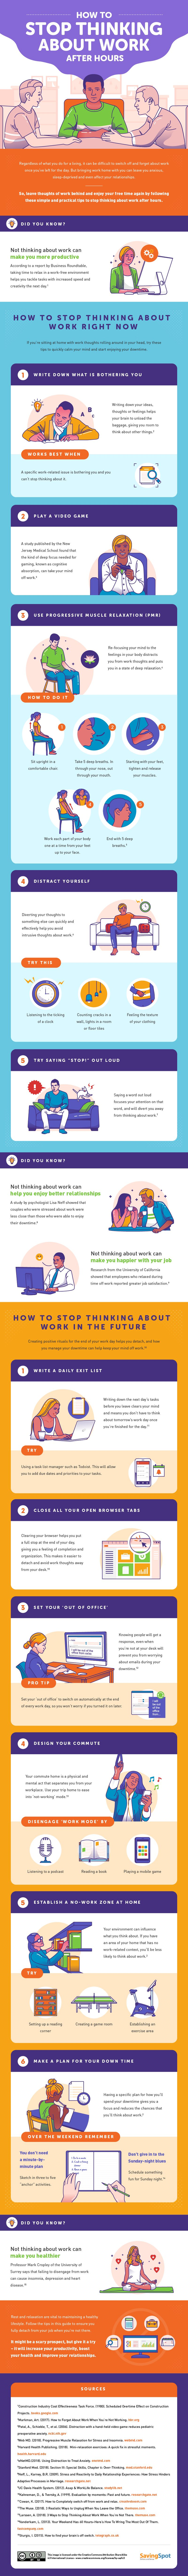 Infographic: How to Stop Thinking About Work in 11 Easy Steps